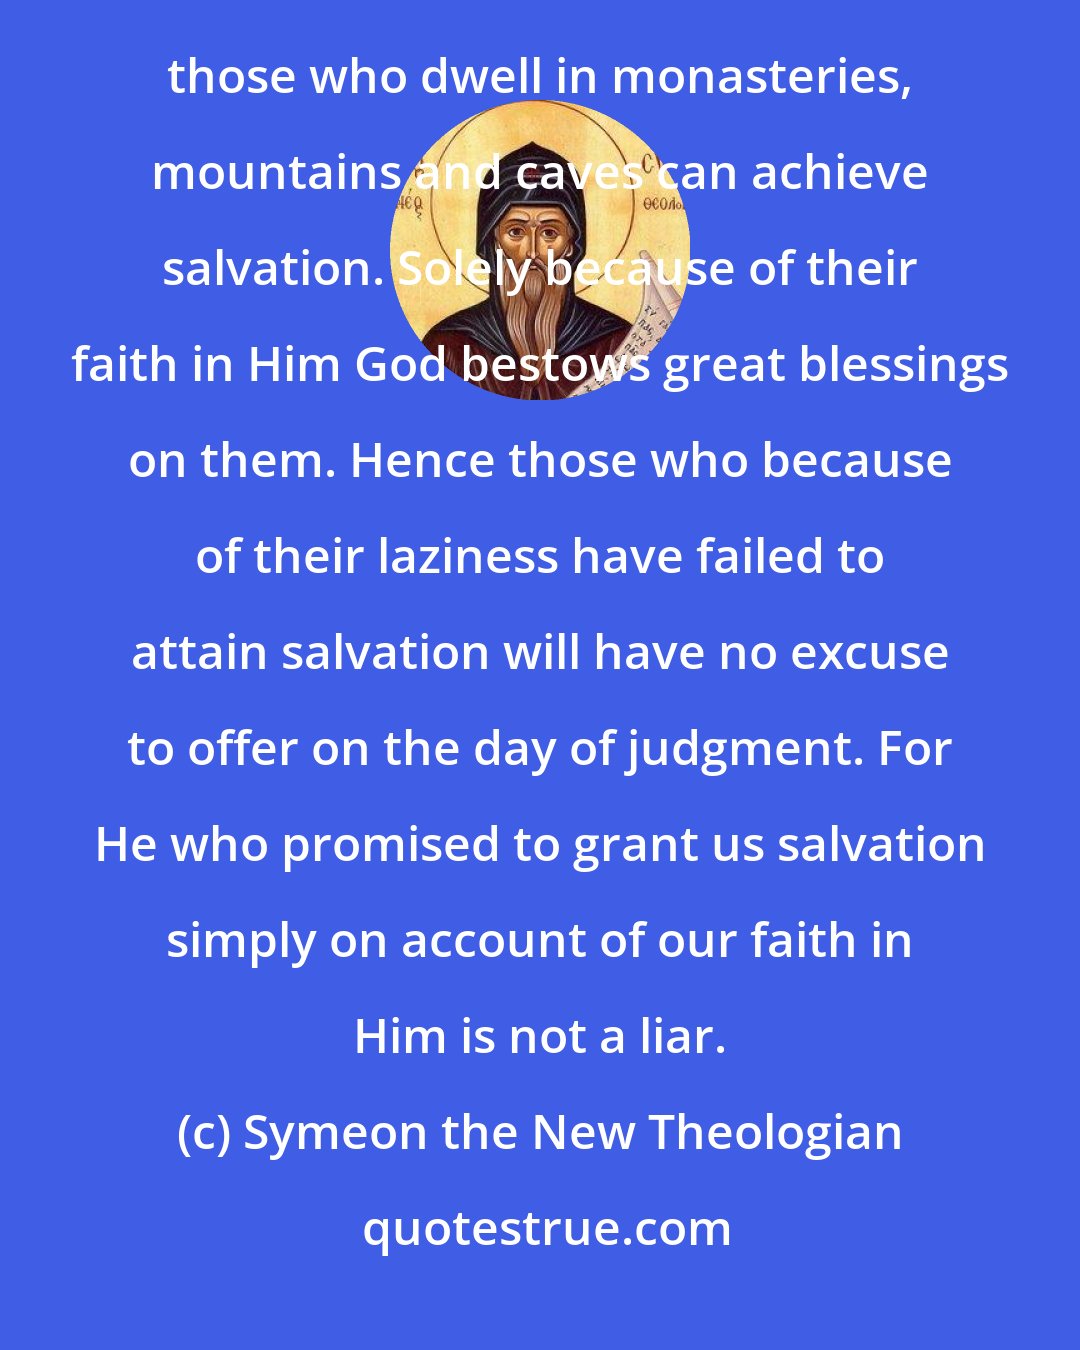 Symeon the New Theologian: Provided they live a worthy life, both those who choose to dwell in the midst of noise and hubbub and those who dwell in monasteries, mountains and caves can achieve salvation. Solely because of their faith in Him God bestows great blessings on them. Hence those who because of their laziness have failed to attain salvation will have no excuse to offer on the day of judgment. For He who promised to grant us salvation simply on account of our faith in Him is not a liar.